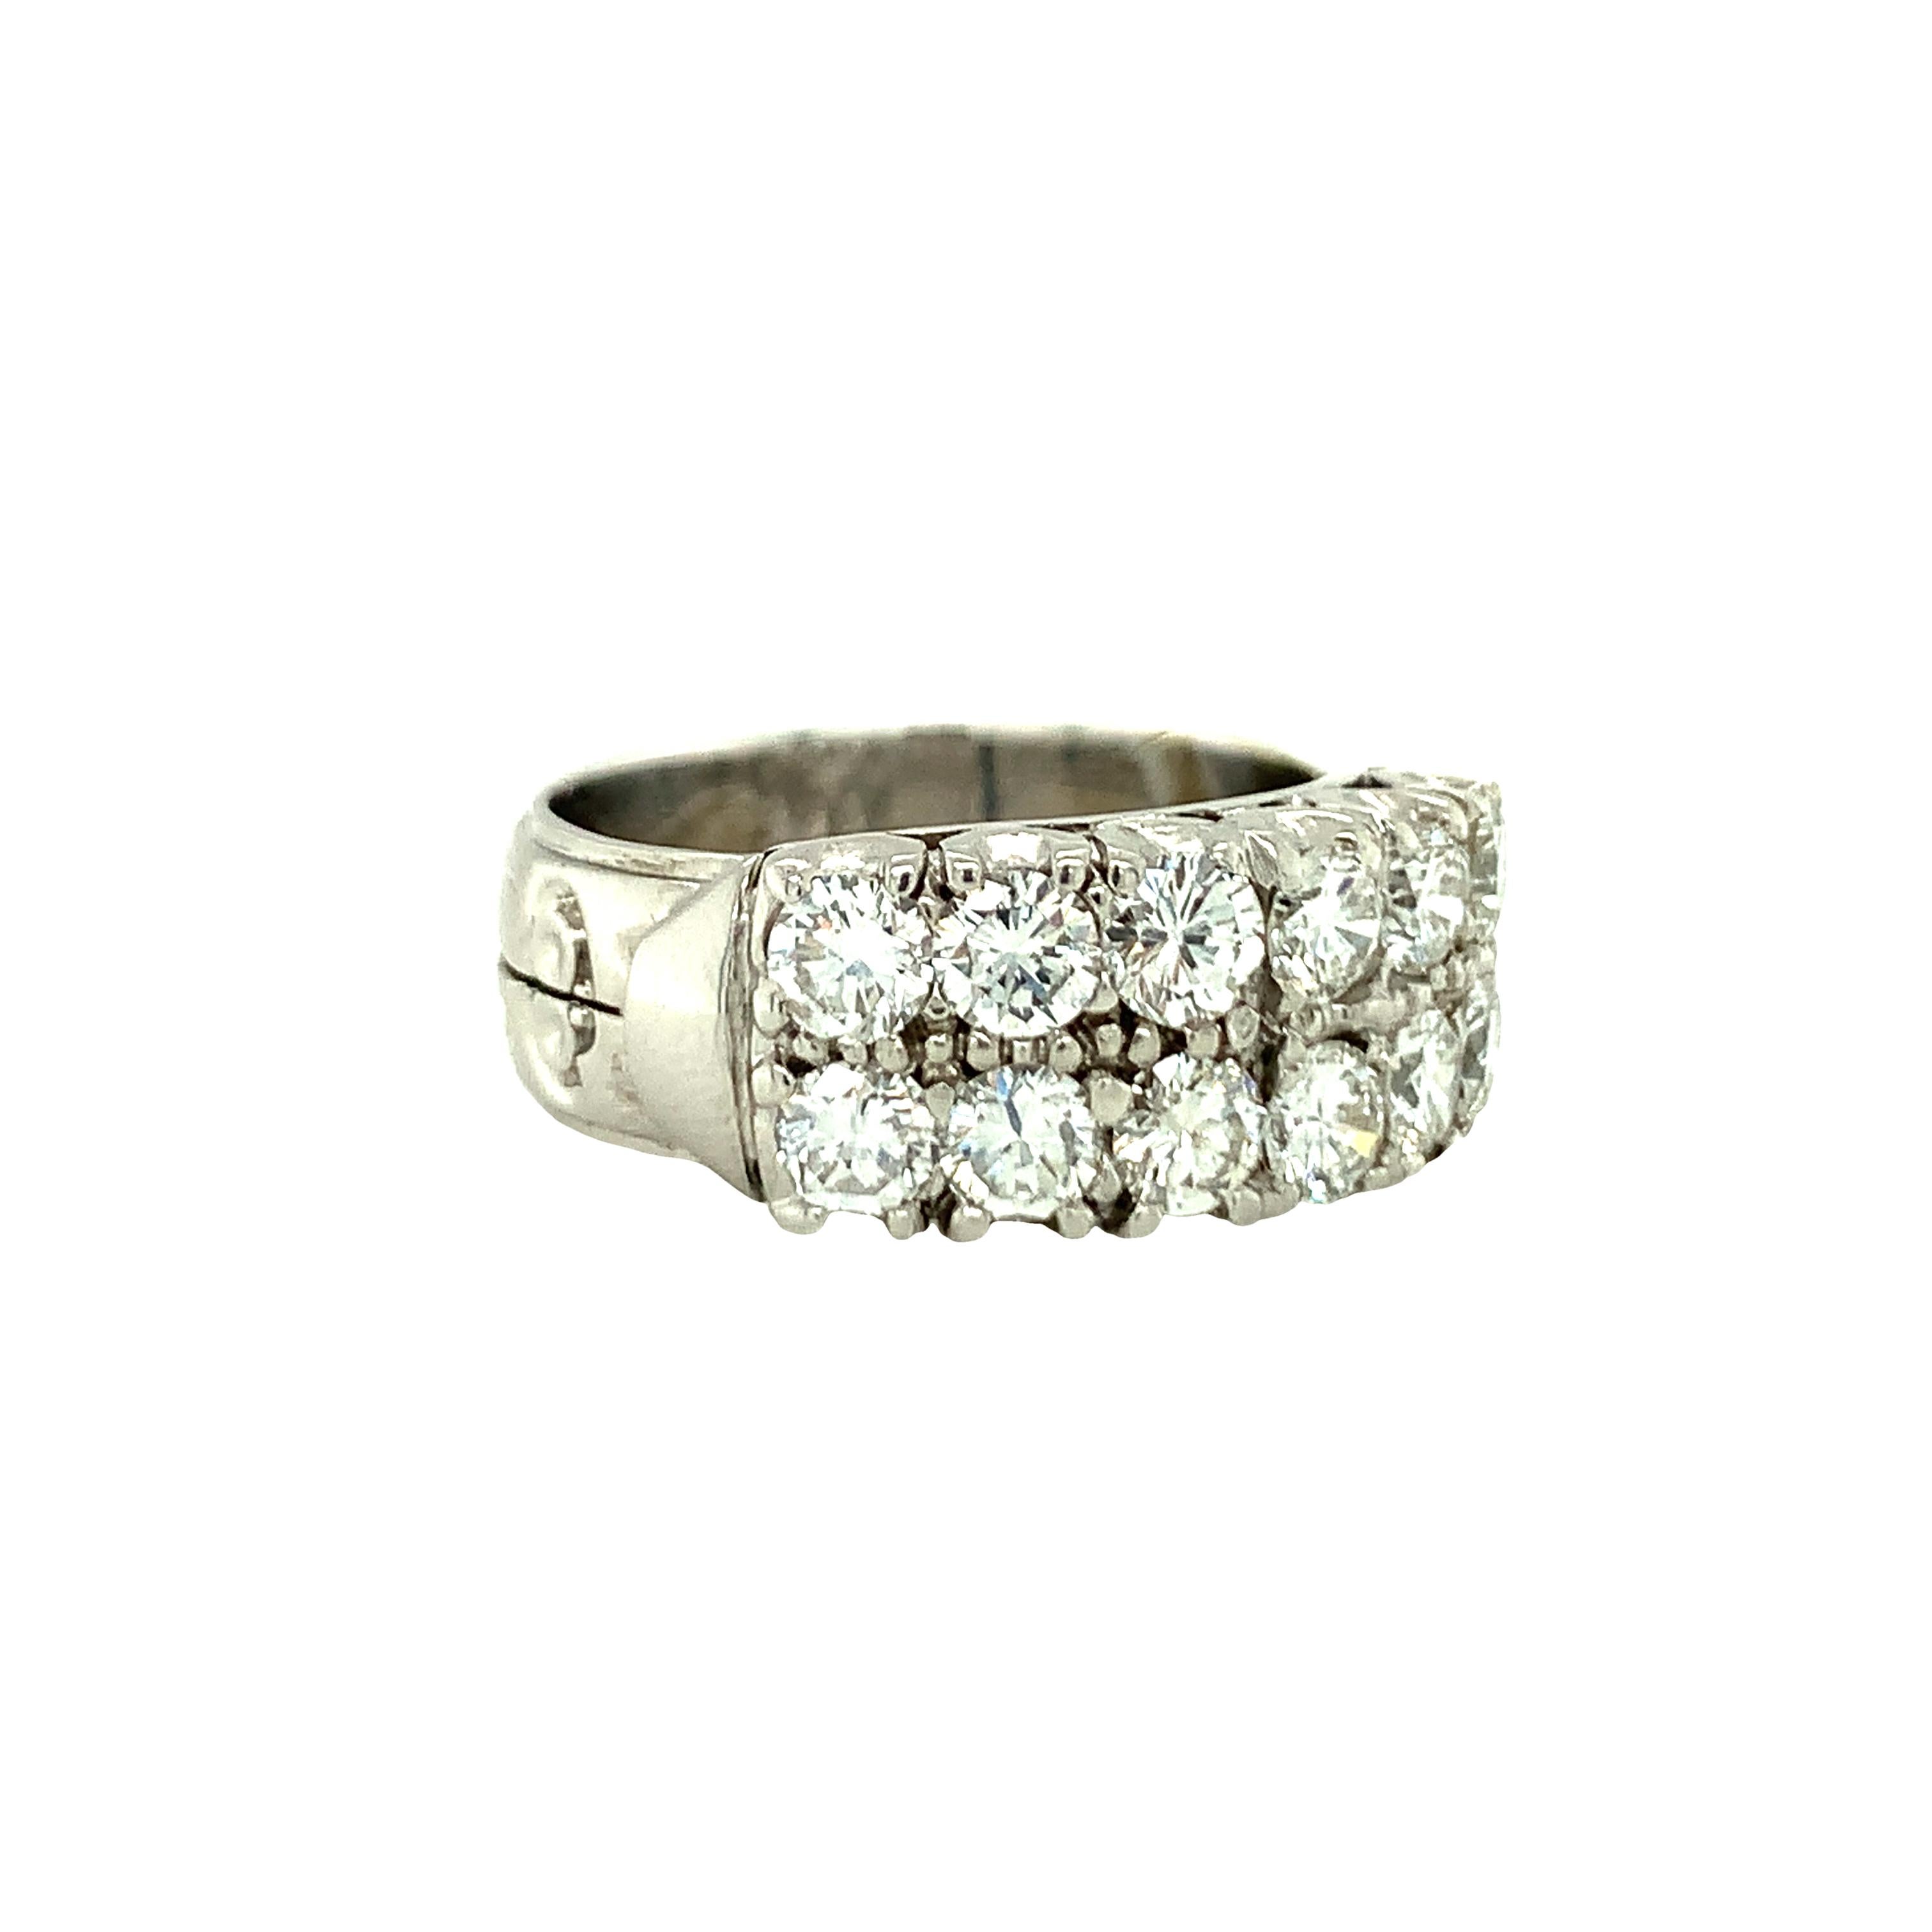 One 14K white gold diamond band featuring 12 prong set, round brilliant cut diamonds set upon two stacked rows totaling 2.18 ct. with J-K color and SI-1 clarity.  With hand engraved details on the band portion.  Measures 9 mm. wide and weighs 9.5